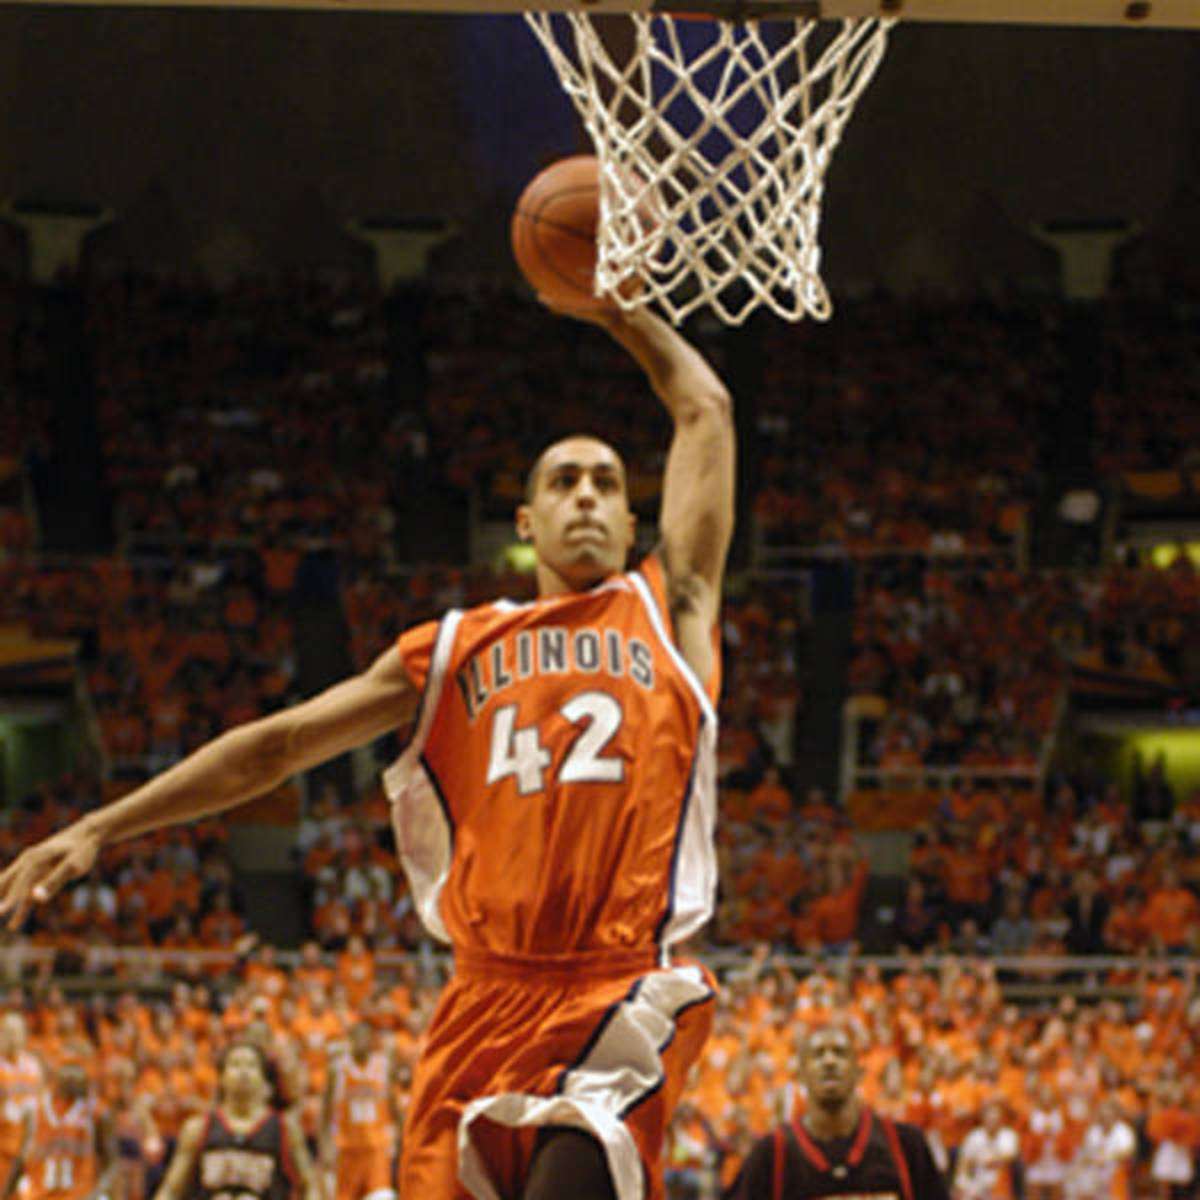 Brian Randle started in 101 of the 123 career games he played in an Illini jersey from 2004-08 and averaged 8.6 points per game along with 5.7 rebounds per contest.